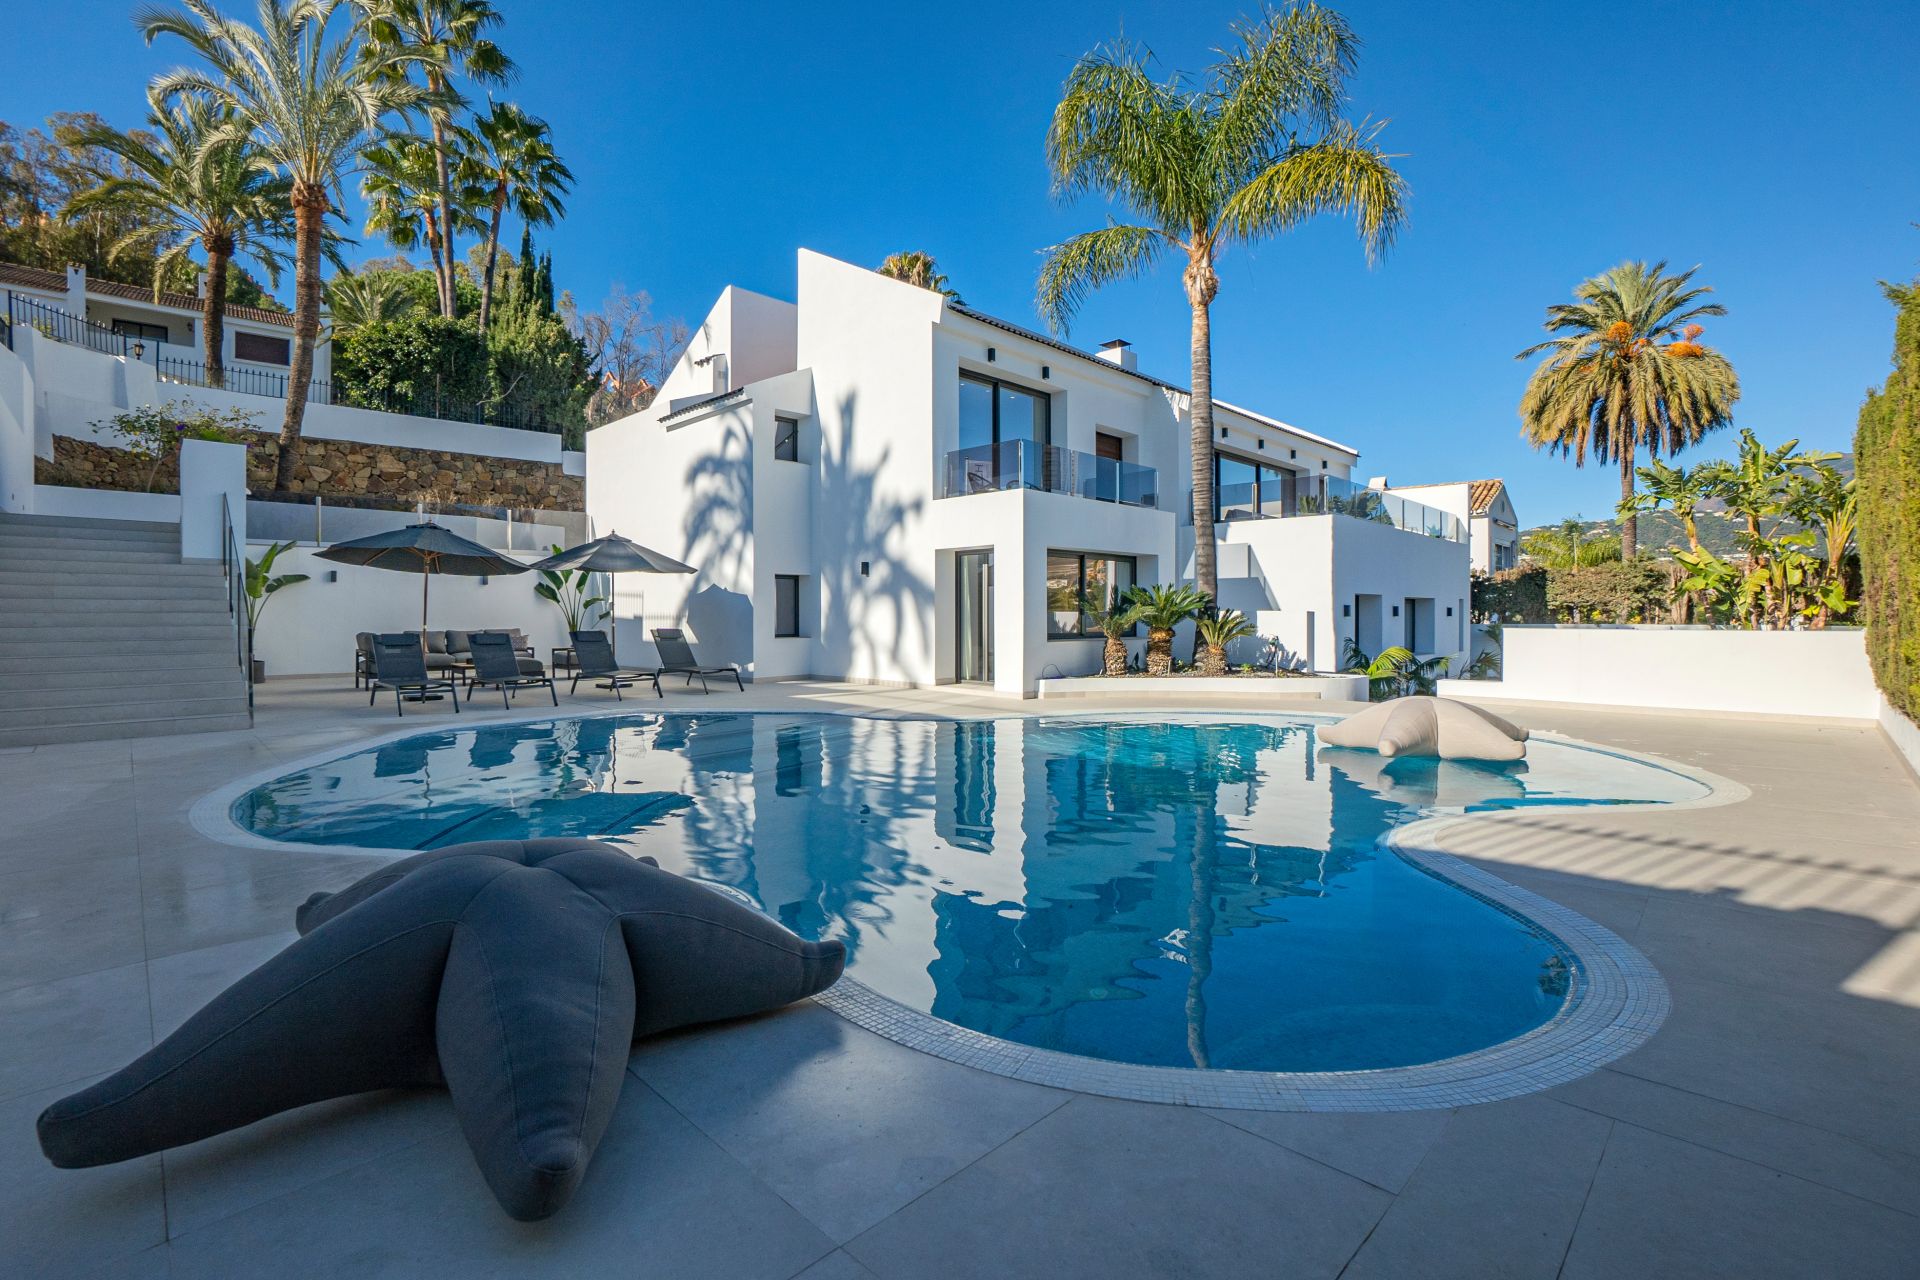 Completely renovated villa with a lot of privacy in Las Brisas with spectacular views to the mountain La Concha